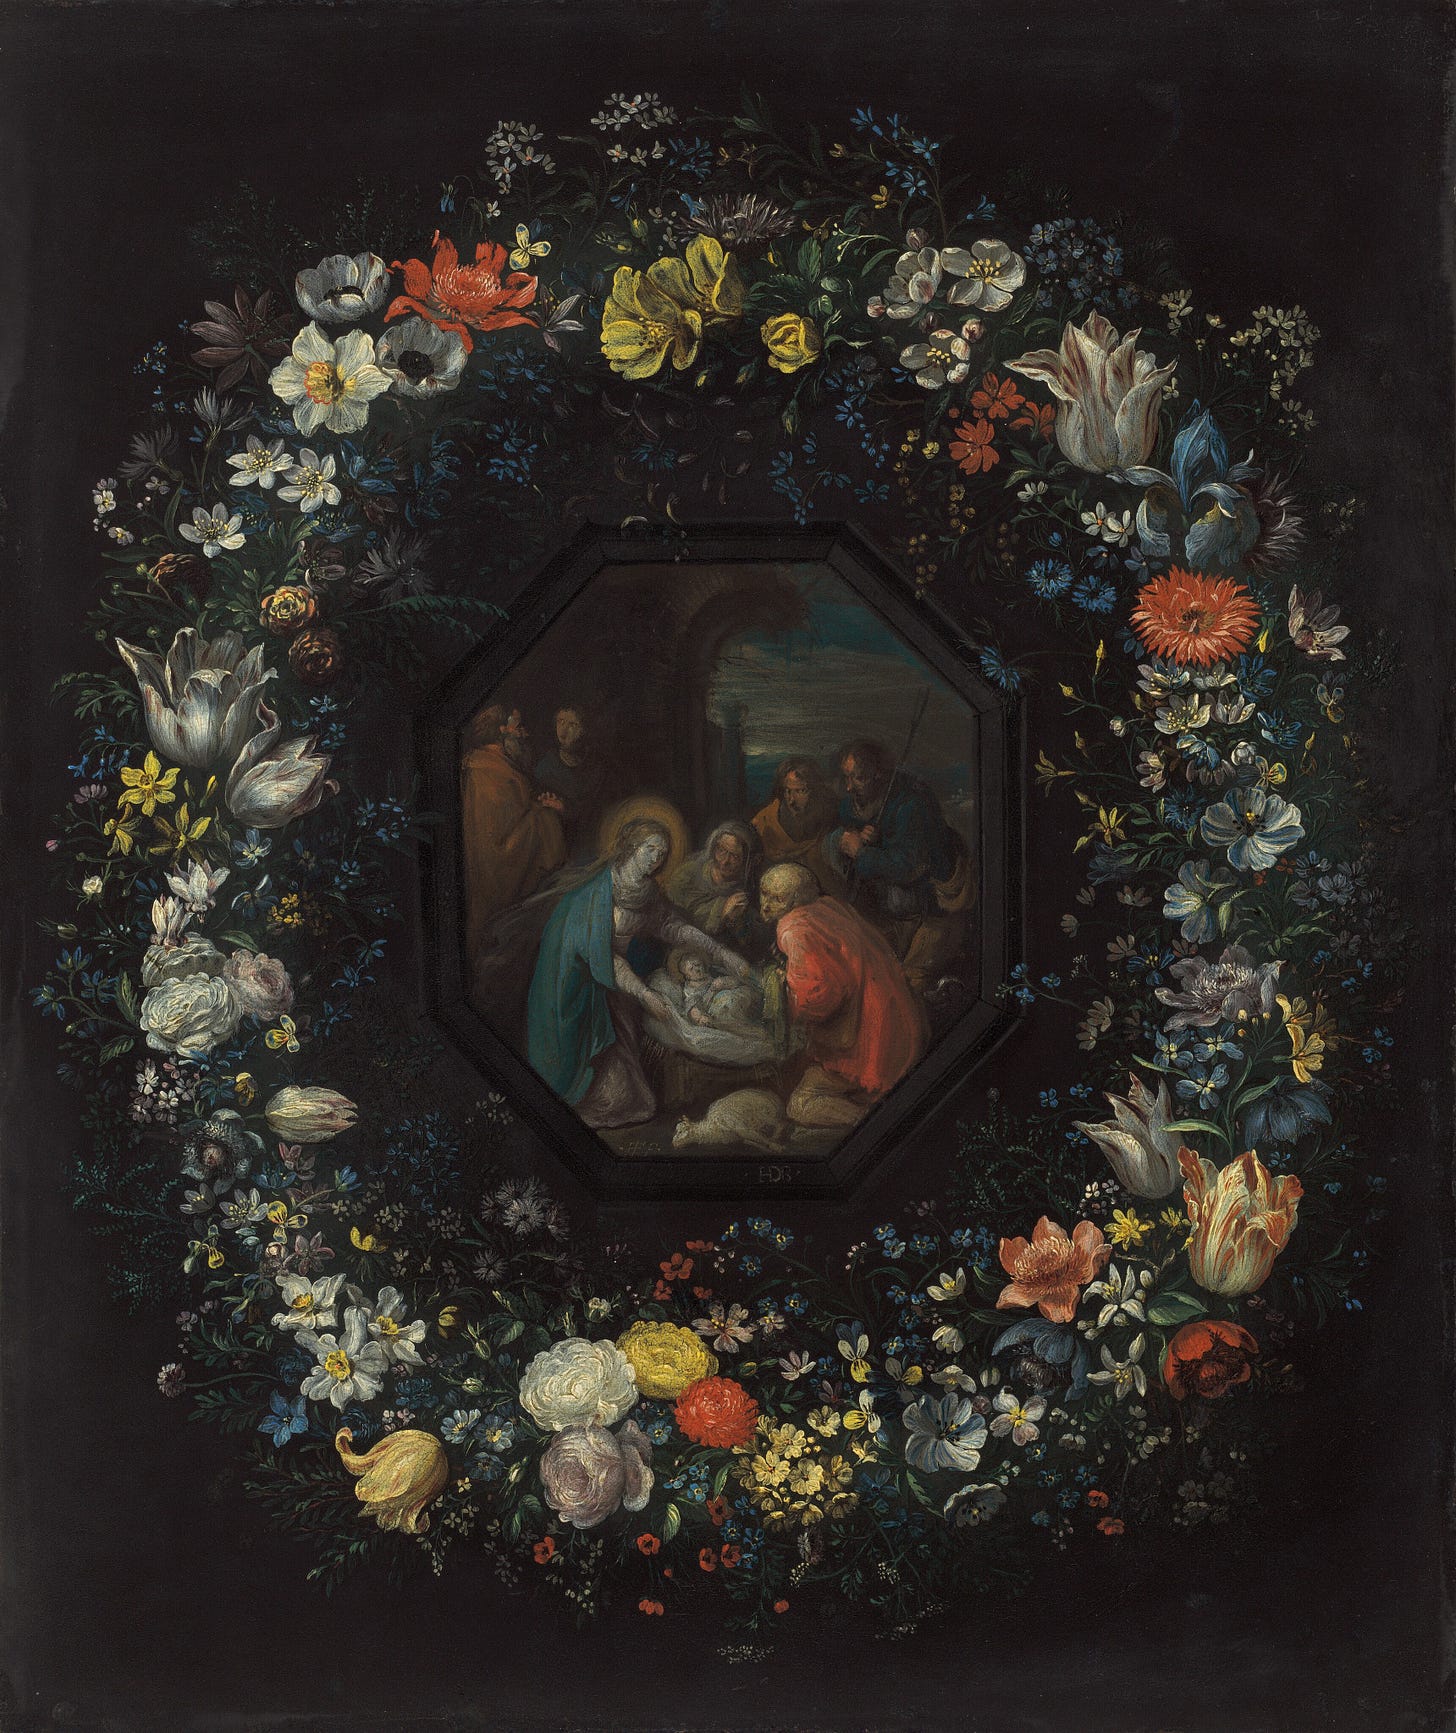 Garland of Flowers with Adoration of the Shepherds, c. 1625/1630 by Frans Francken the Younger and Master HDB